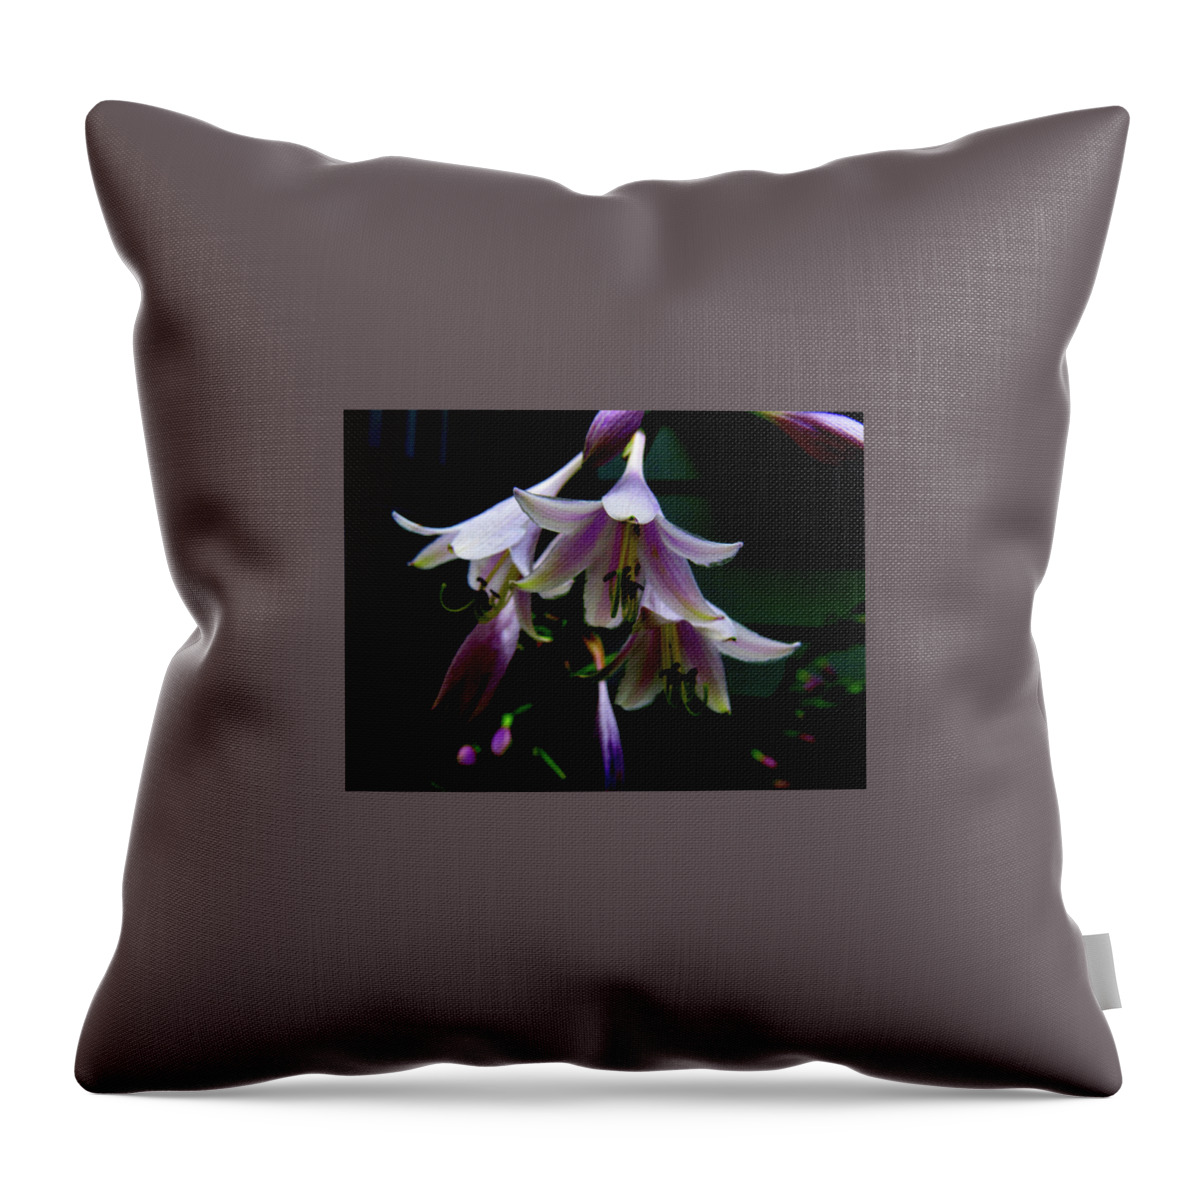 Purple Blossoms Throw Pillow featuring the photograph Hostas Blossoms by Linda Stern